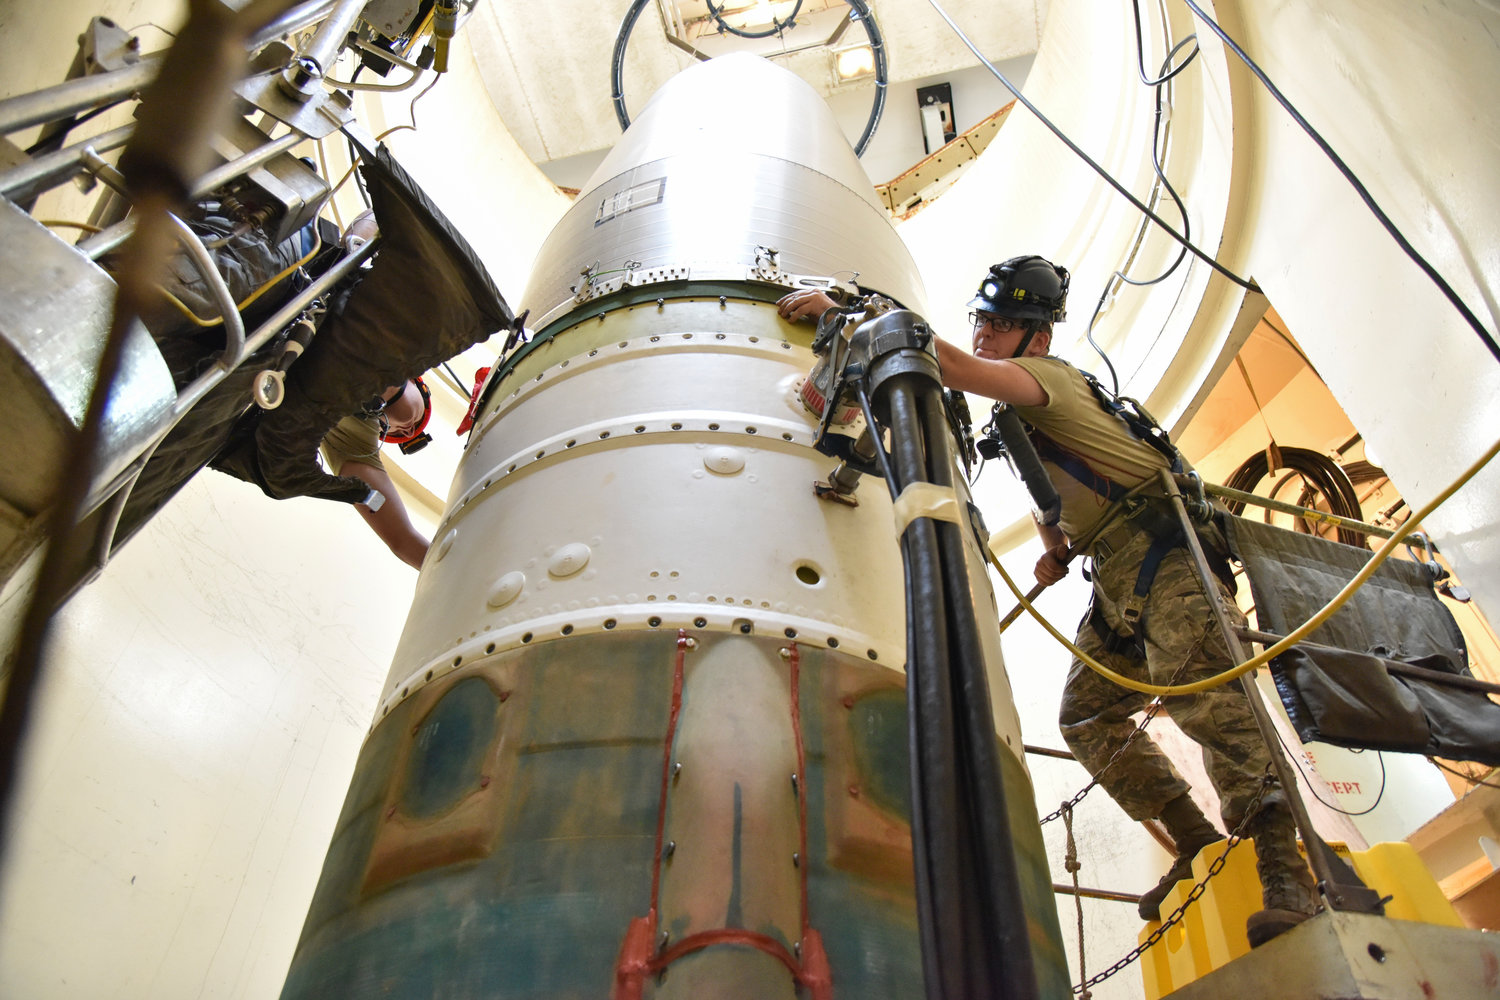 In this image provided by the U.S. Air Force, Airman 1st Class Jackson Ligon, left, and Senior Airman Jonathan Marinaccio, 341st Missile Maintenance Squadron technicians, connect a re-entry system to a spacer on an intercontinental ballistic missile during a Simulated Electronic Launch-Minuteman test Sept. 22, 2020, at a launch facility near Malmstrom Air Force Base in Great Falls, Mont. The top Air Force officer in charge of the nation's air and ground-launched nuclear missiles has requested an official investigation into the number of officers who are reporting the same type of blood cancer after serving at Malmstrom Air Force Base. (Senior Airman Daniel Brosam/U.S. Air Force via AP)